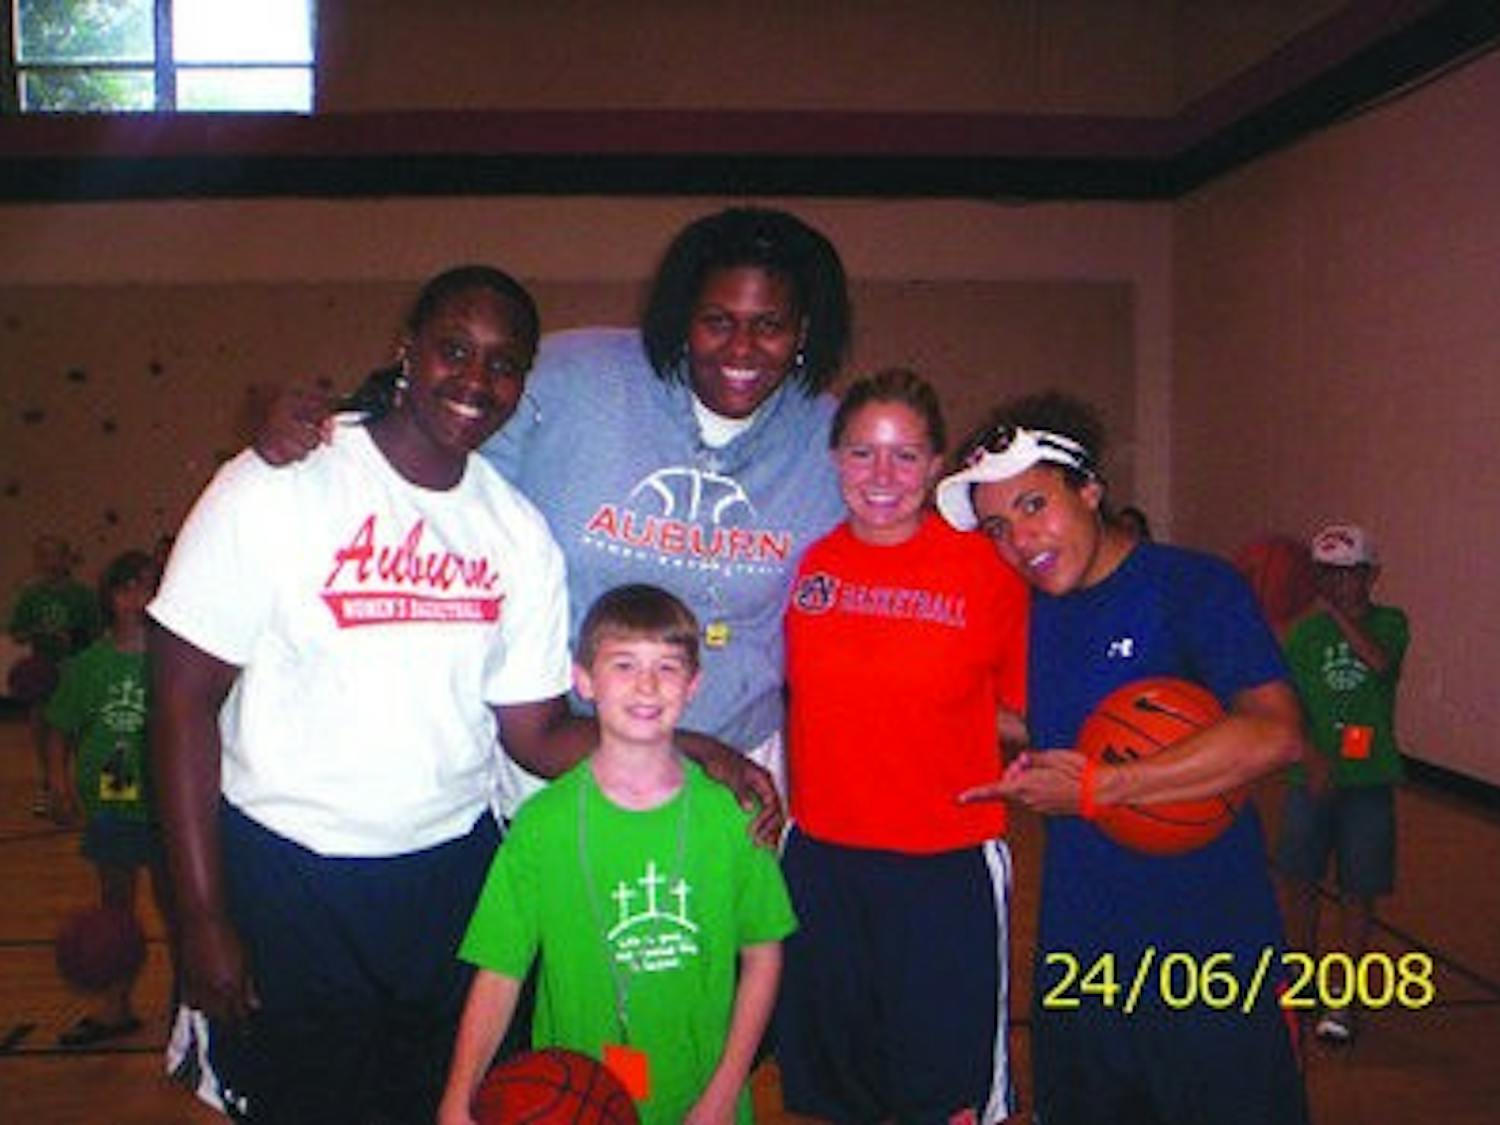 Milaika Pickard, Keshonda Carrier, Alli Smalley and Sierra Sims volunteer at the Summer J.A.M. at the AUMC. (CONTRIBUTED)